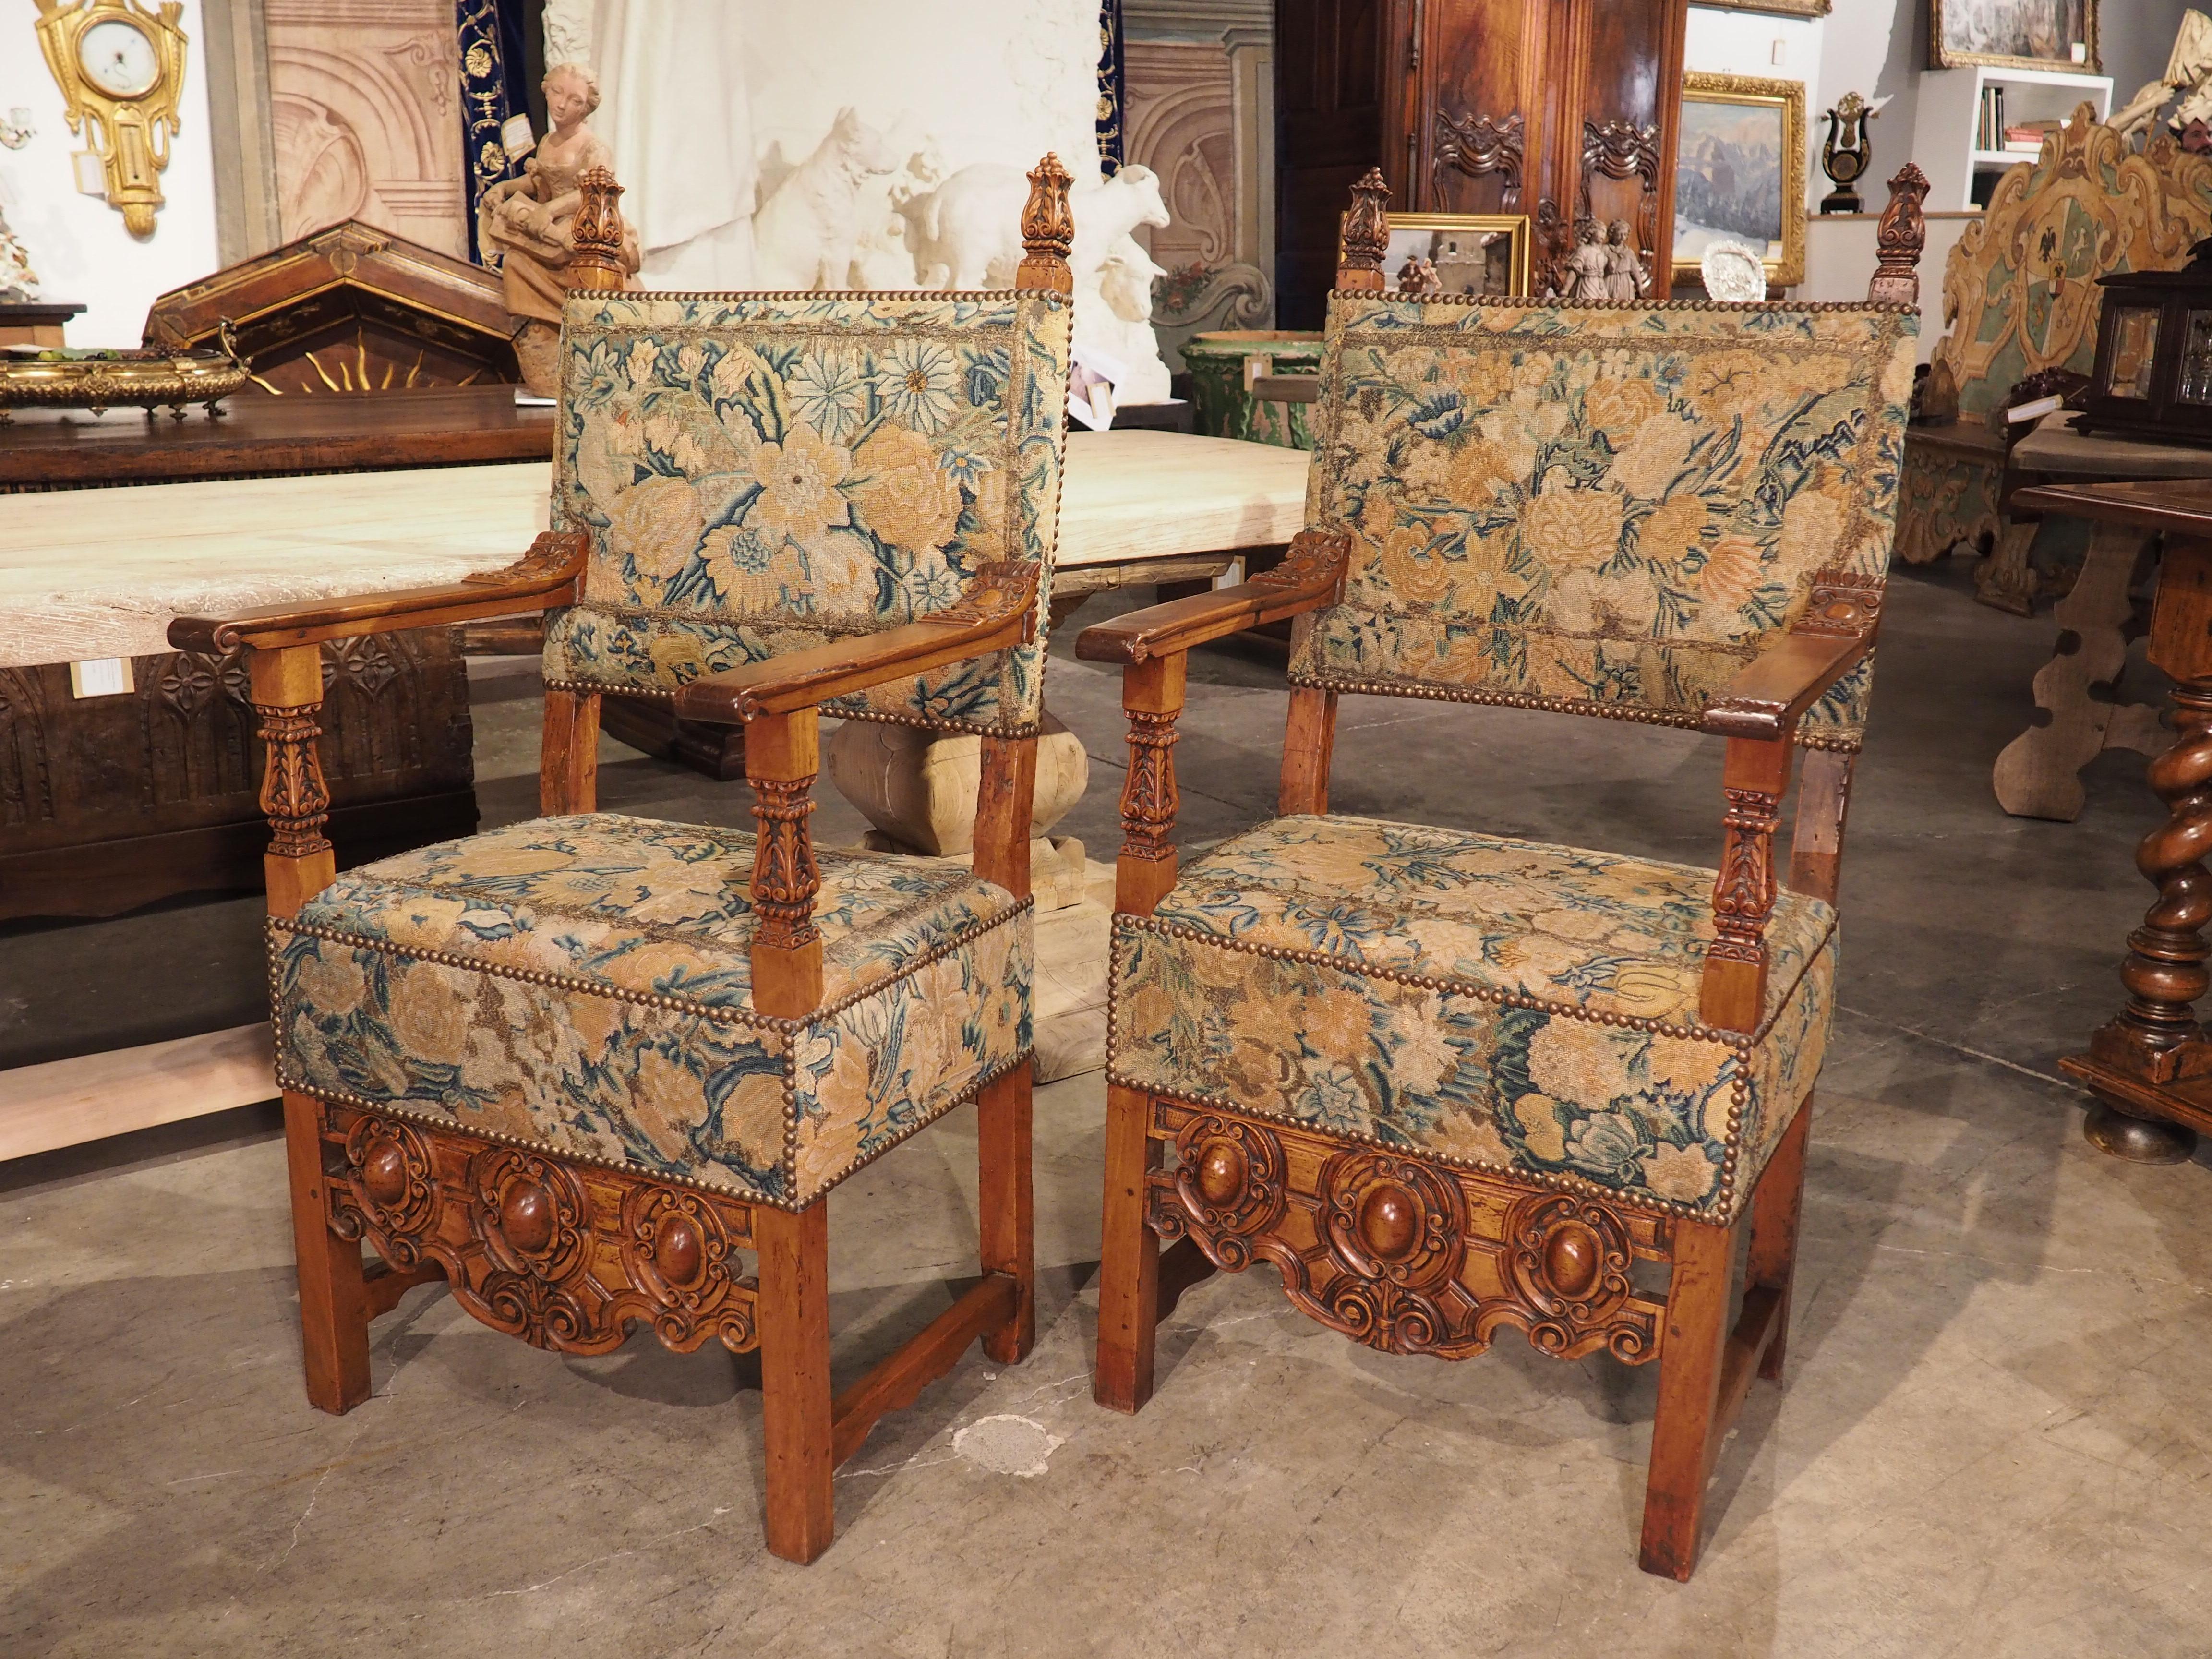 Pair of Antique Italian Carved Walnut Armchairs with Needlepoint Upholstery For Sale 8